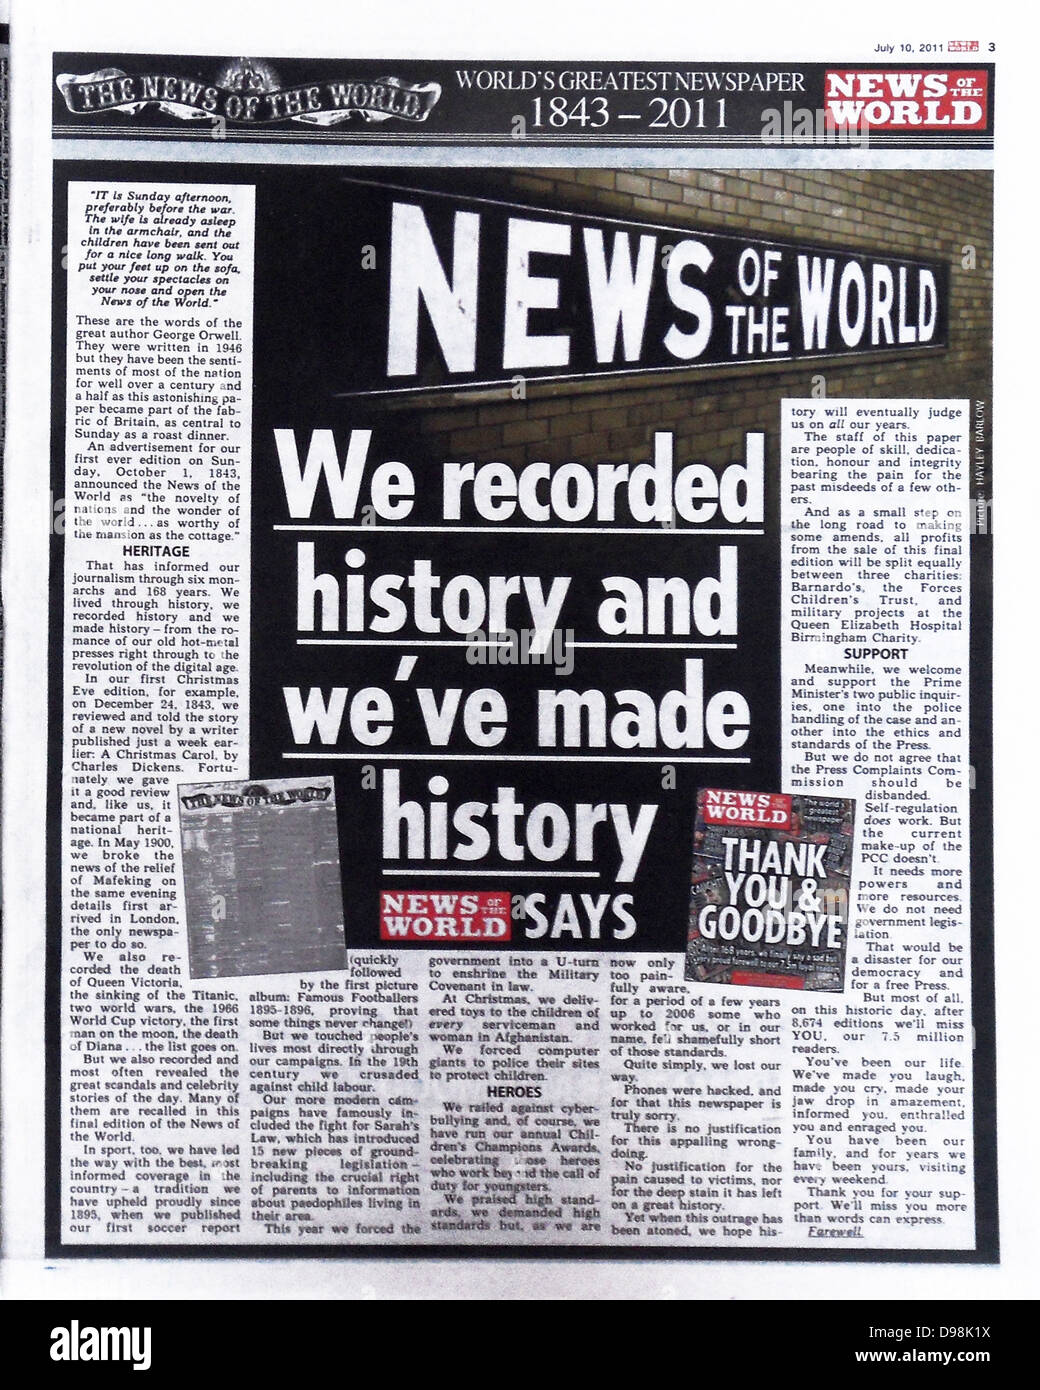 The 'News of the World' Newspaper 10th July 2011. Final issue. Stock Photo